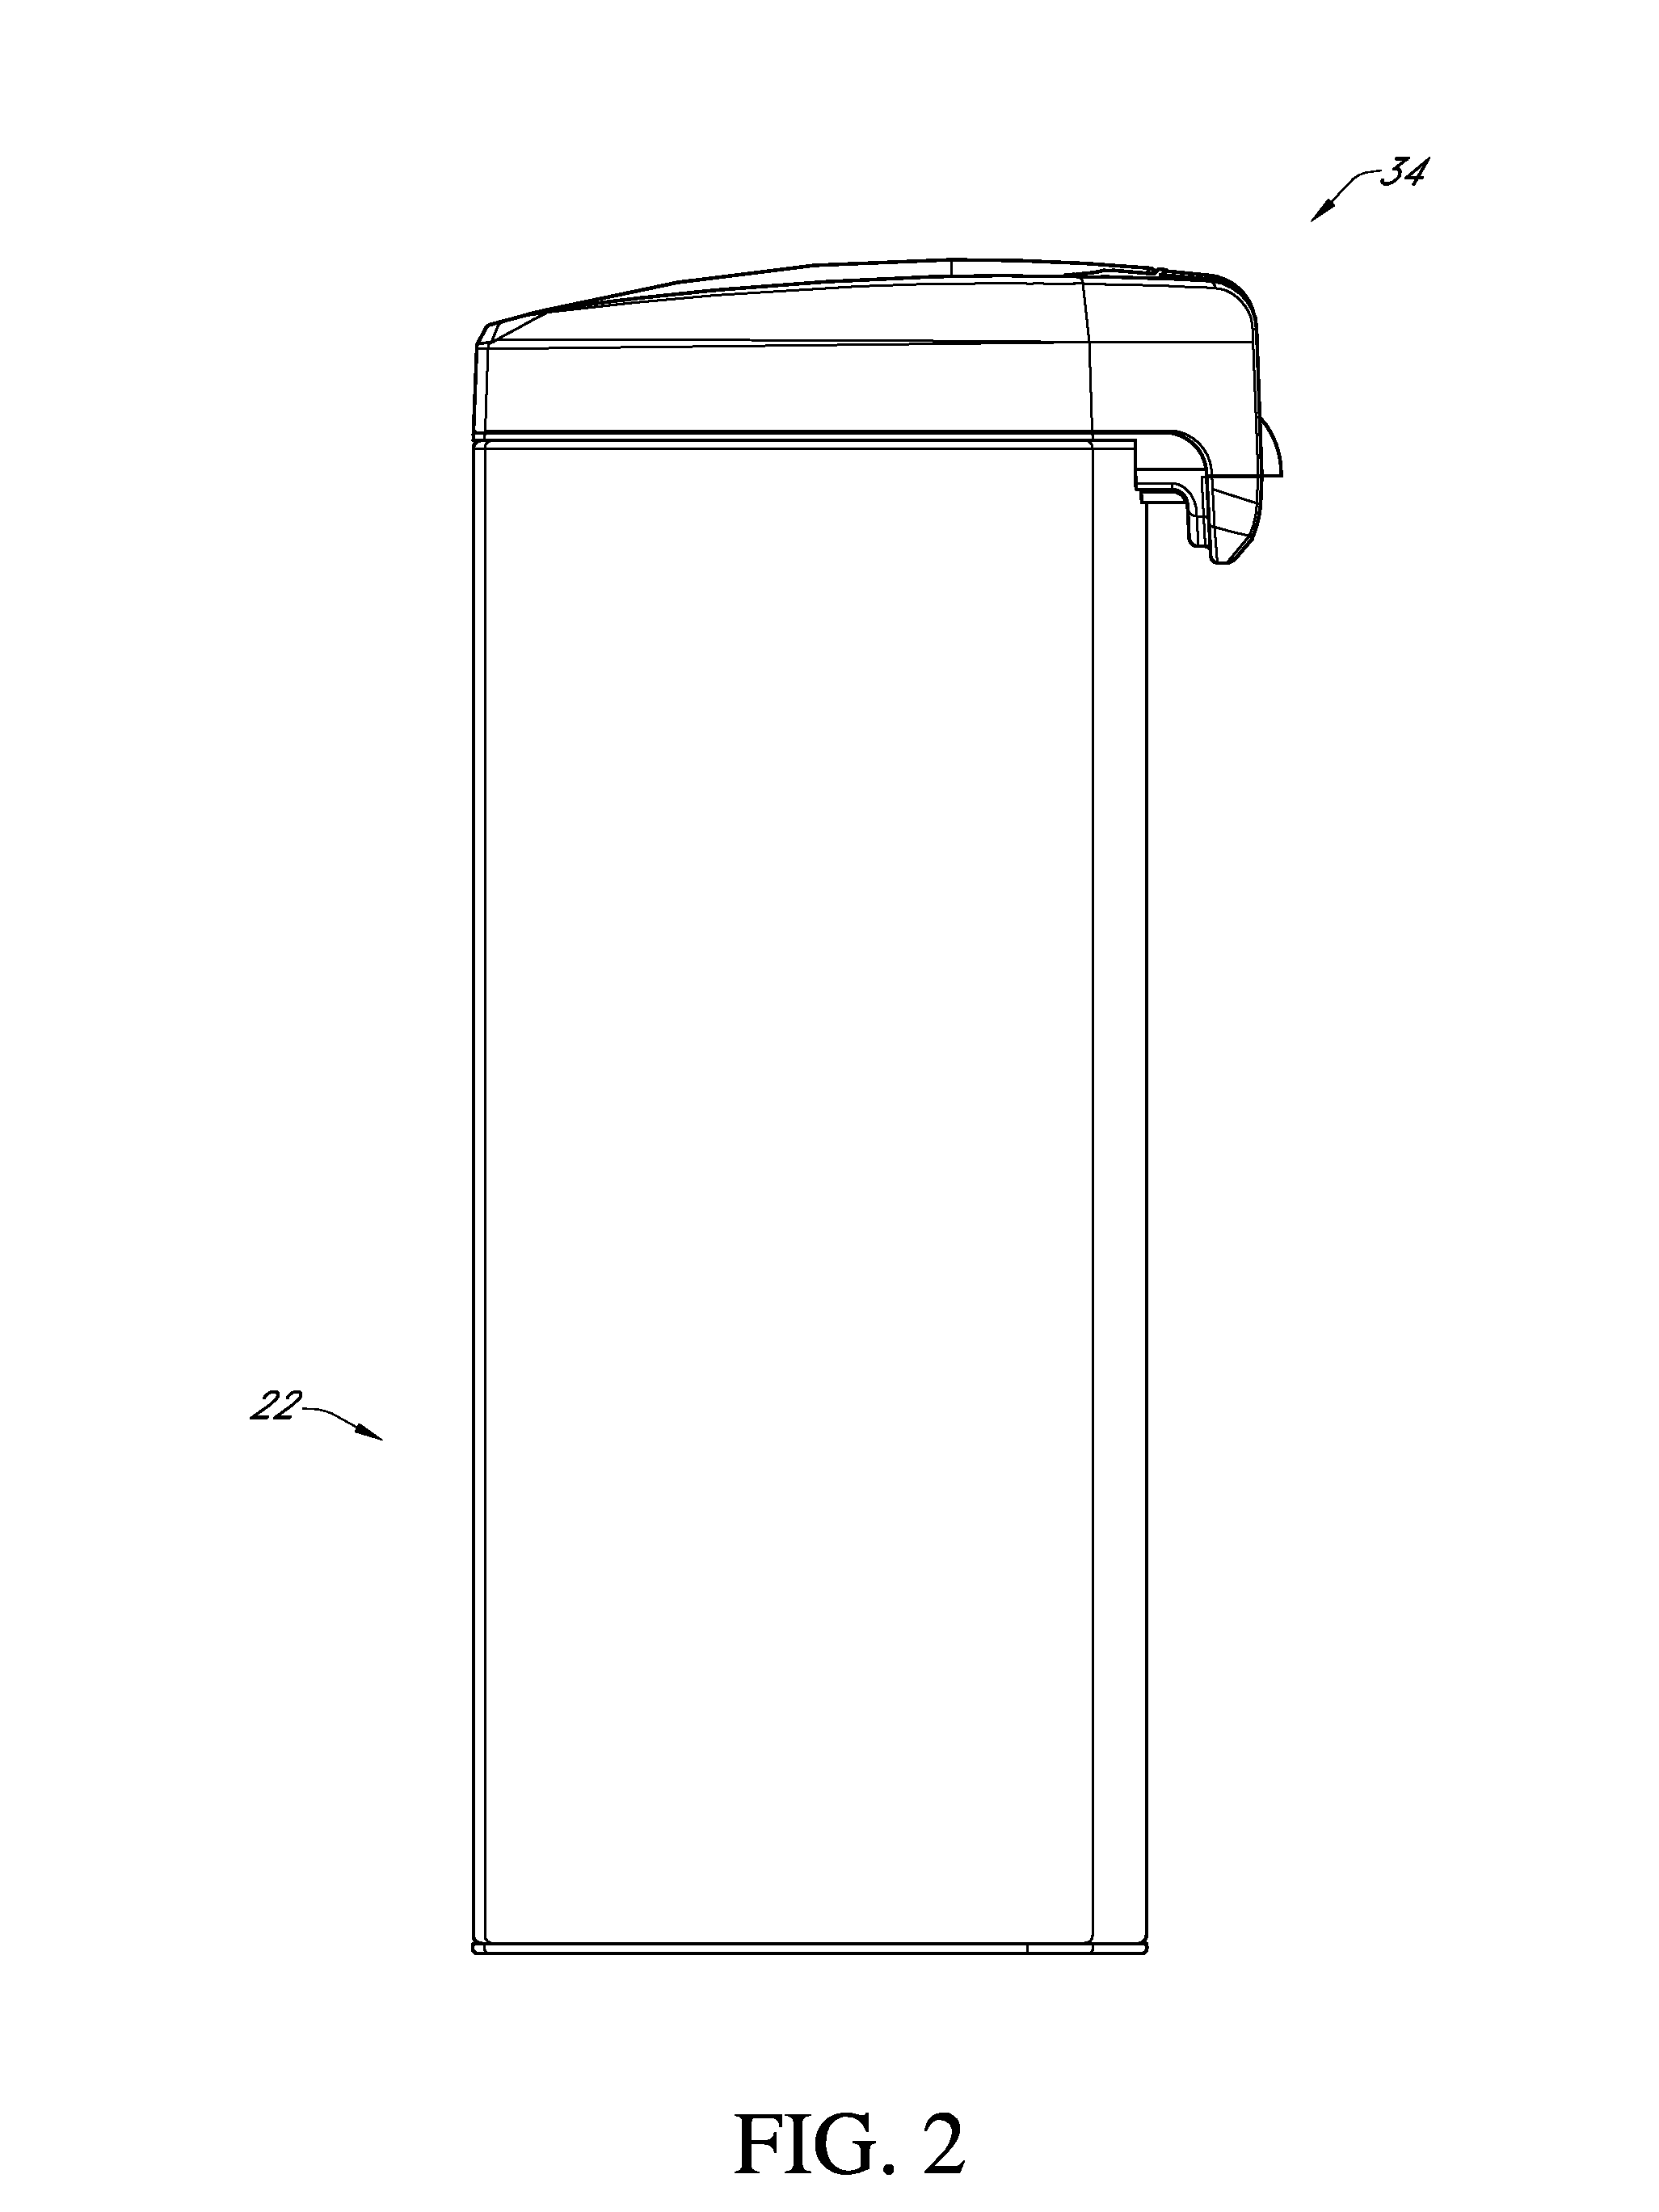 Trash can with power operated lid